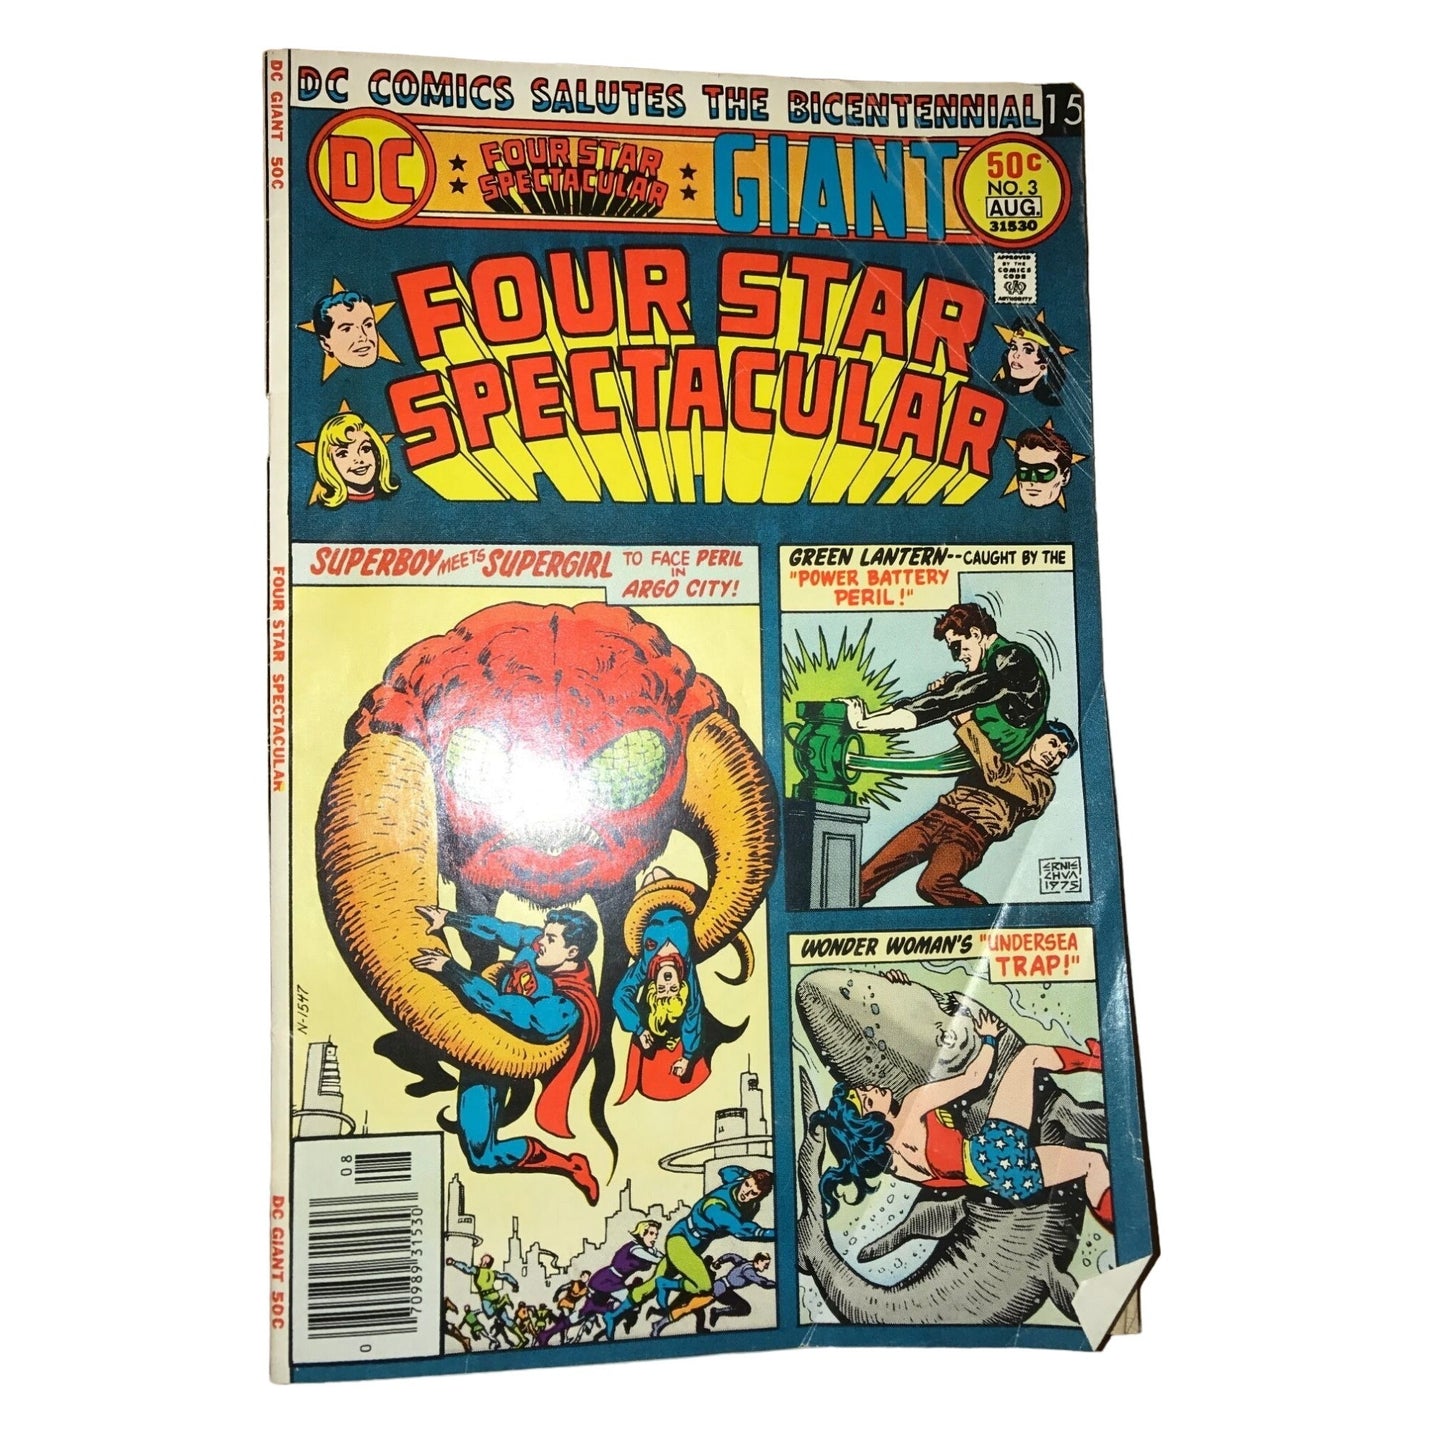 DC Giant - Four Star Spectacular No. 3 Vintage Comic Book